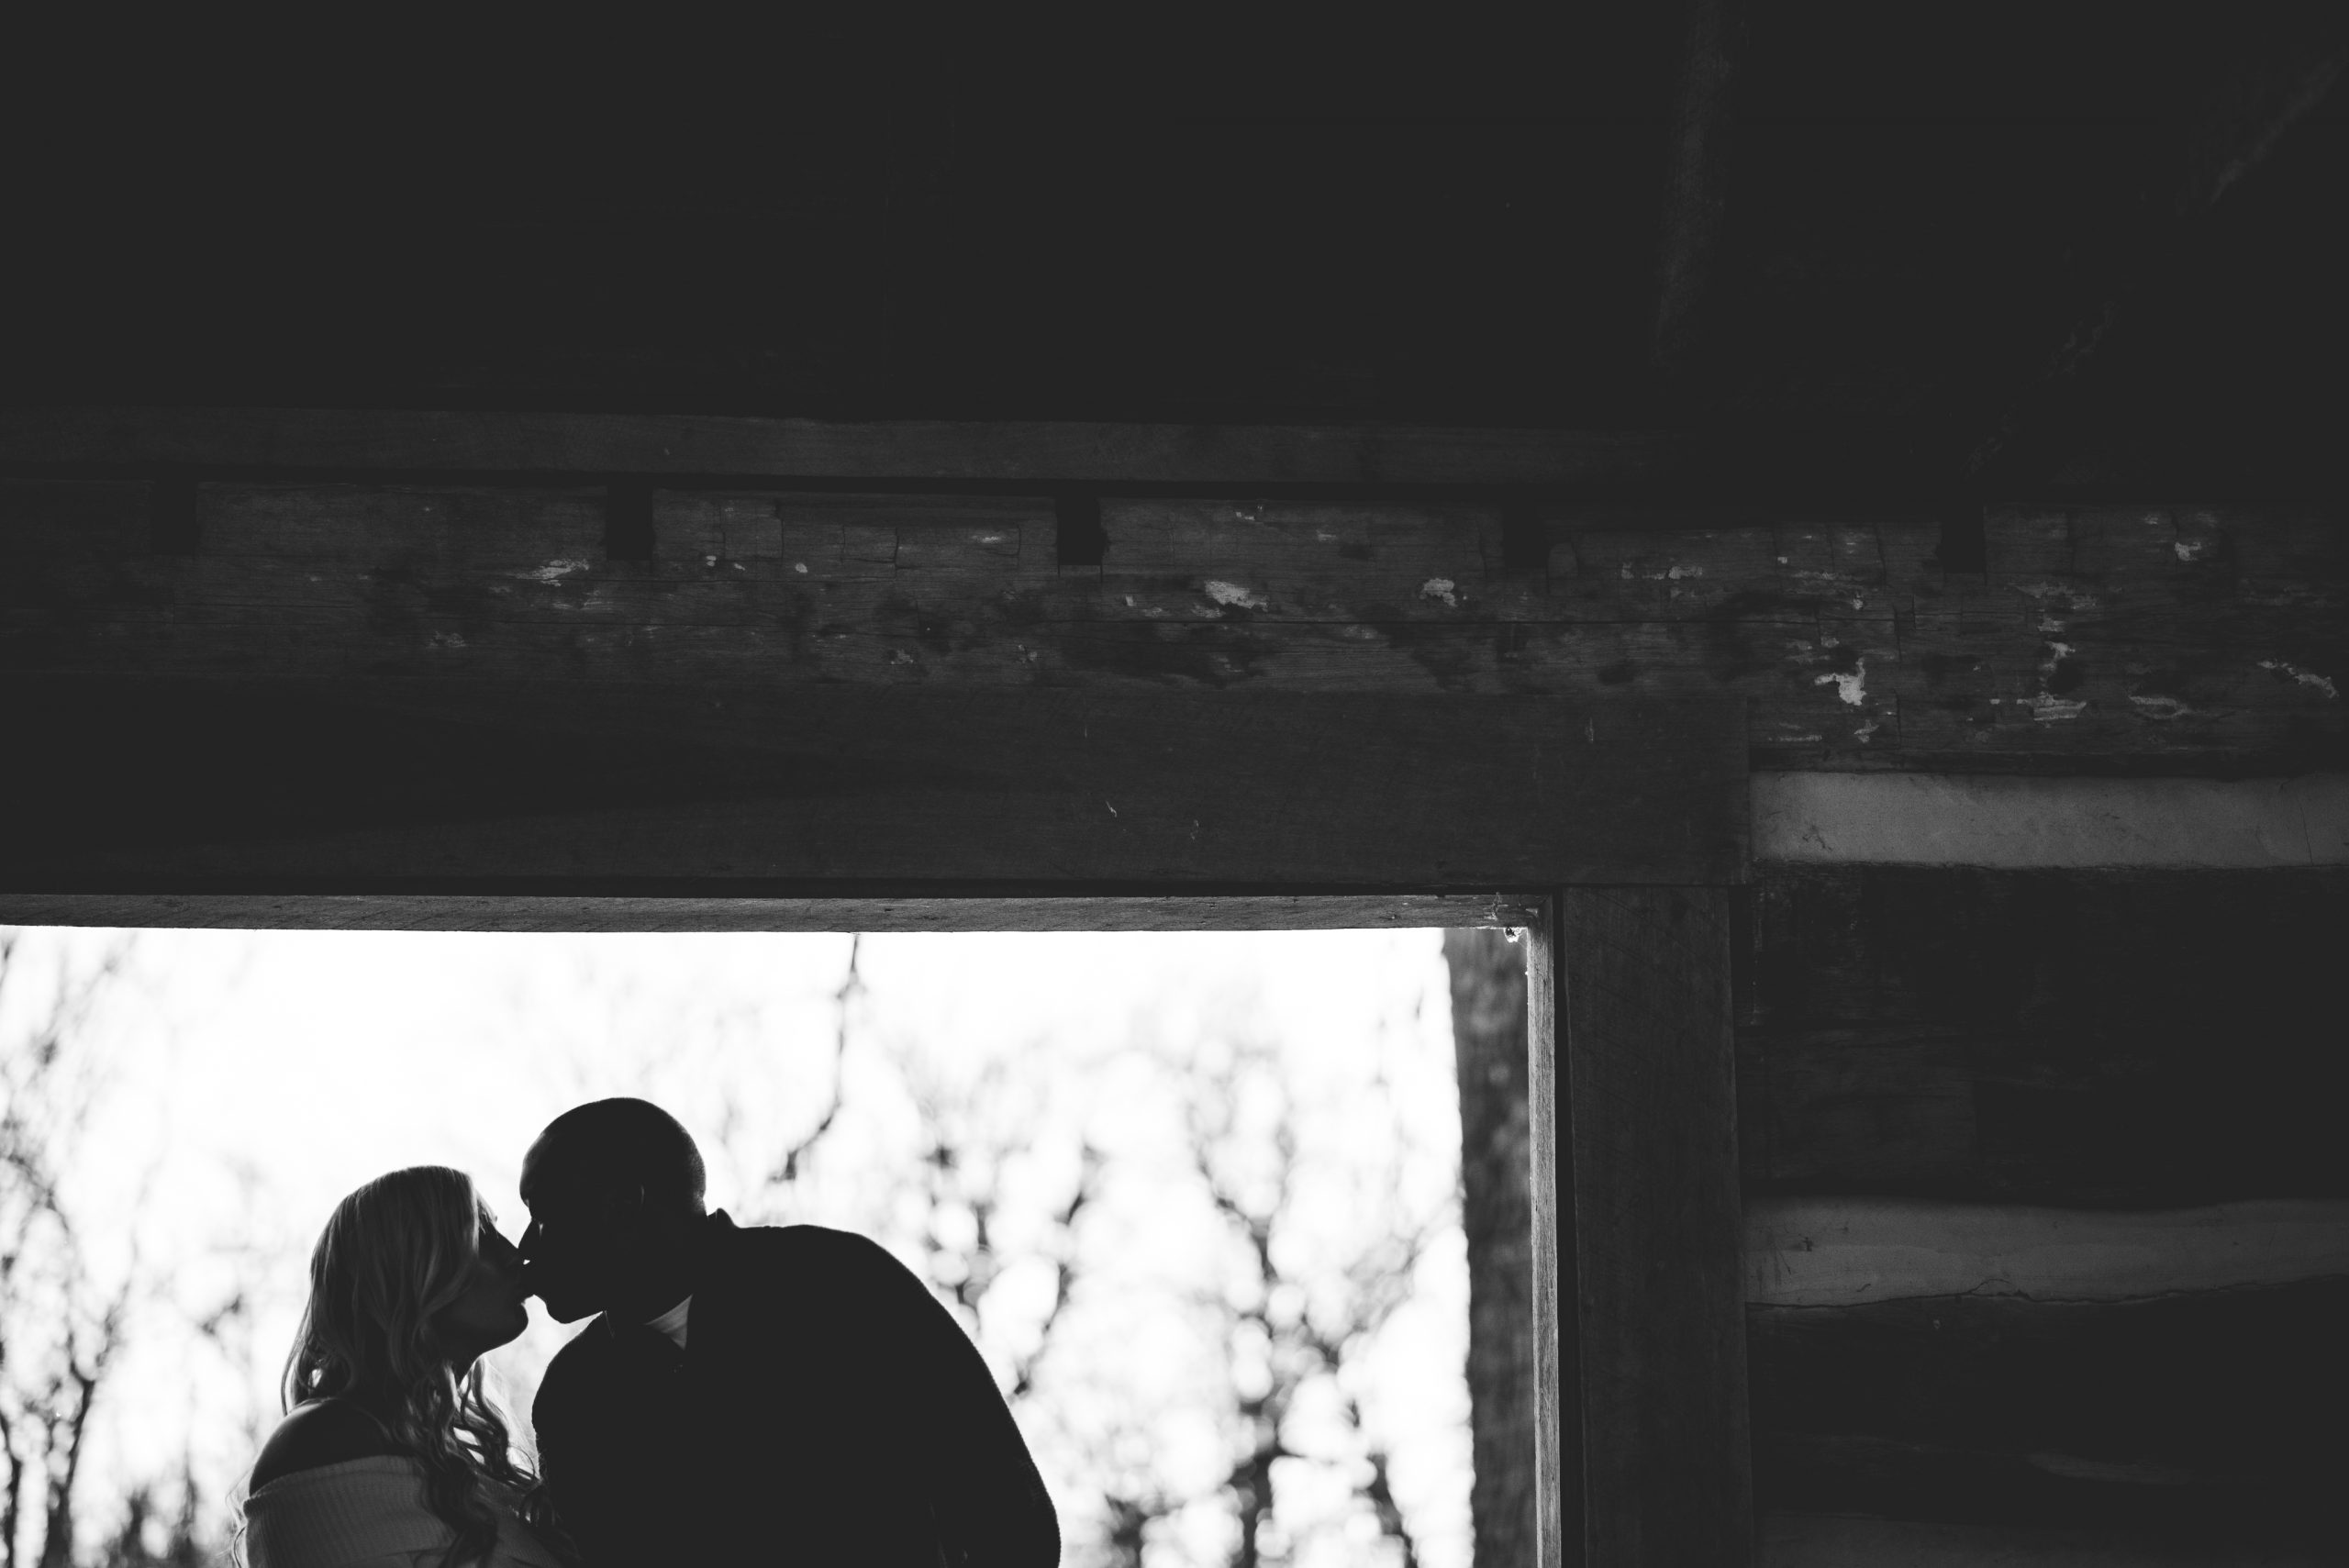 Winter engagement session in Indianapolis